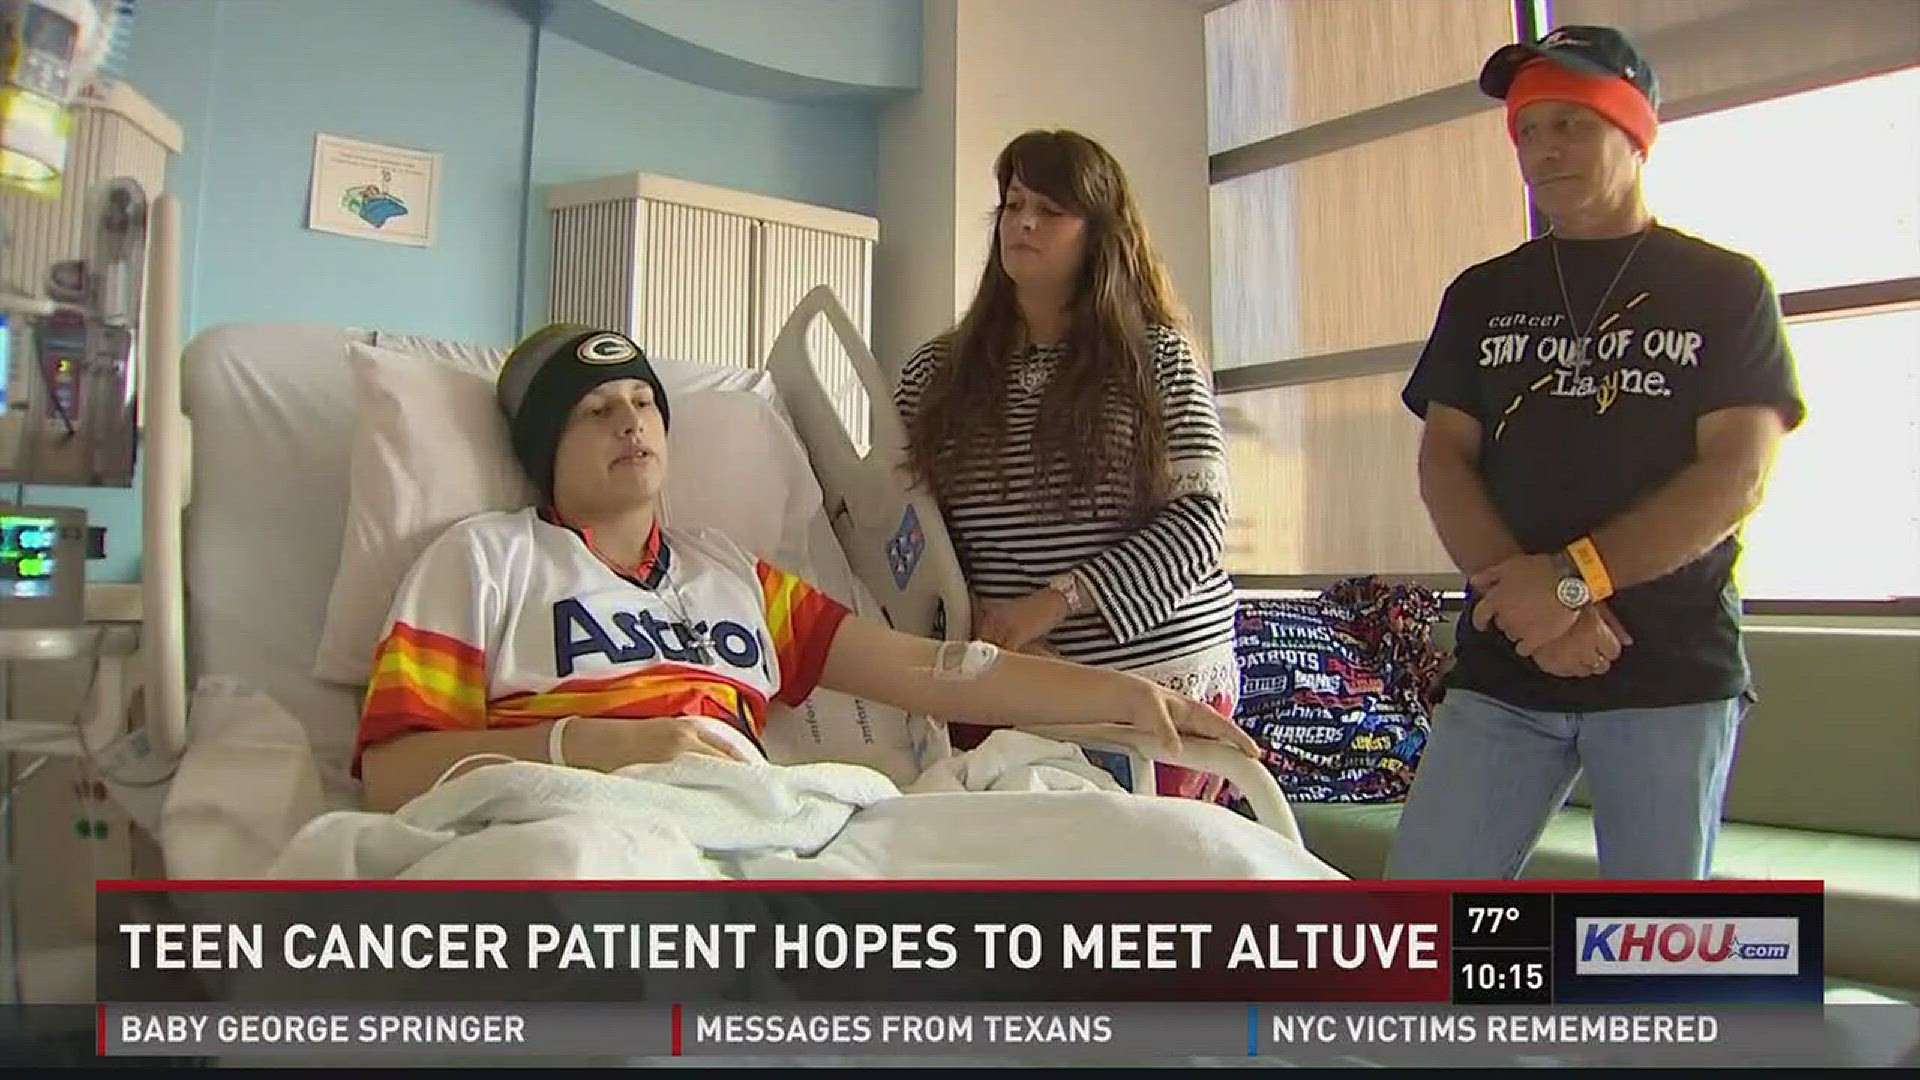 After a 16 year old baseball player lost his leg unexpectedly this week, he says the Astros and the World Series have been a gift during dark times.